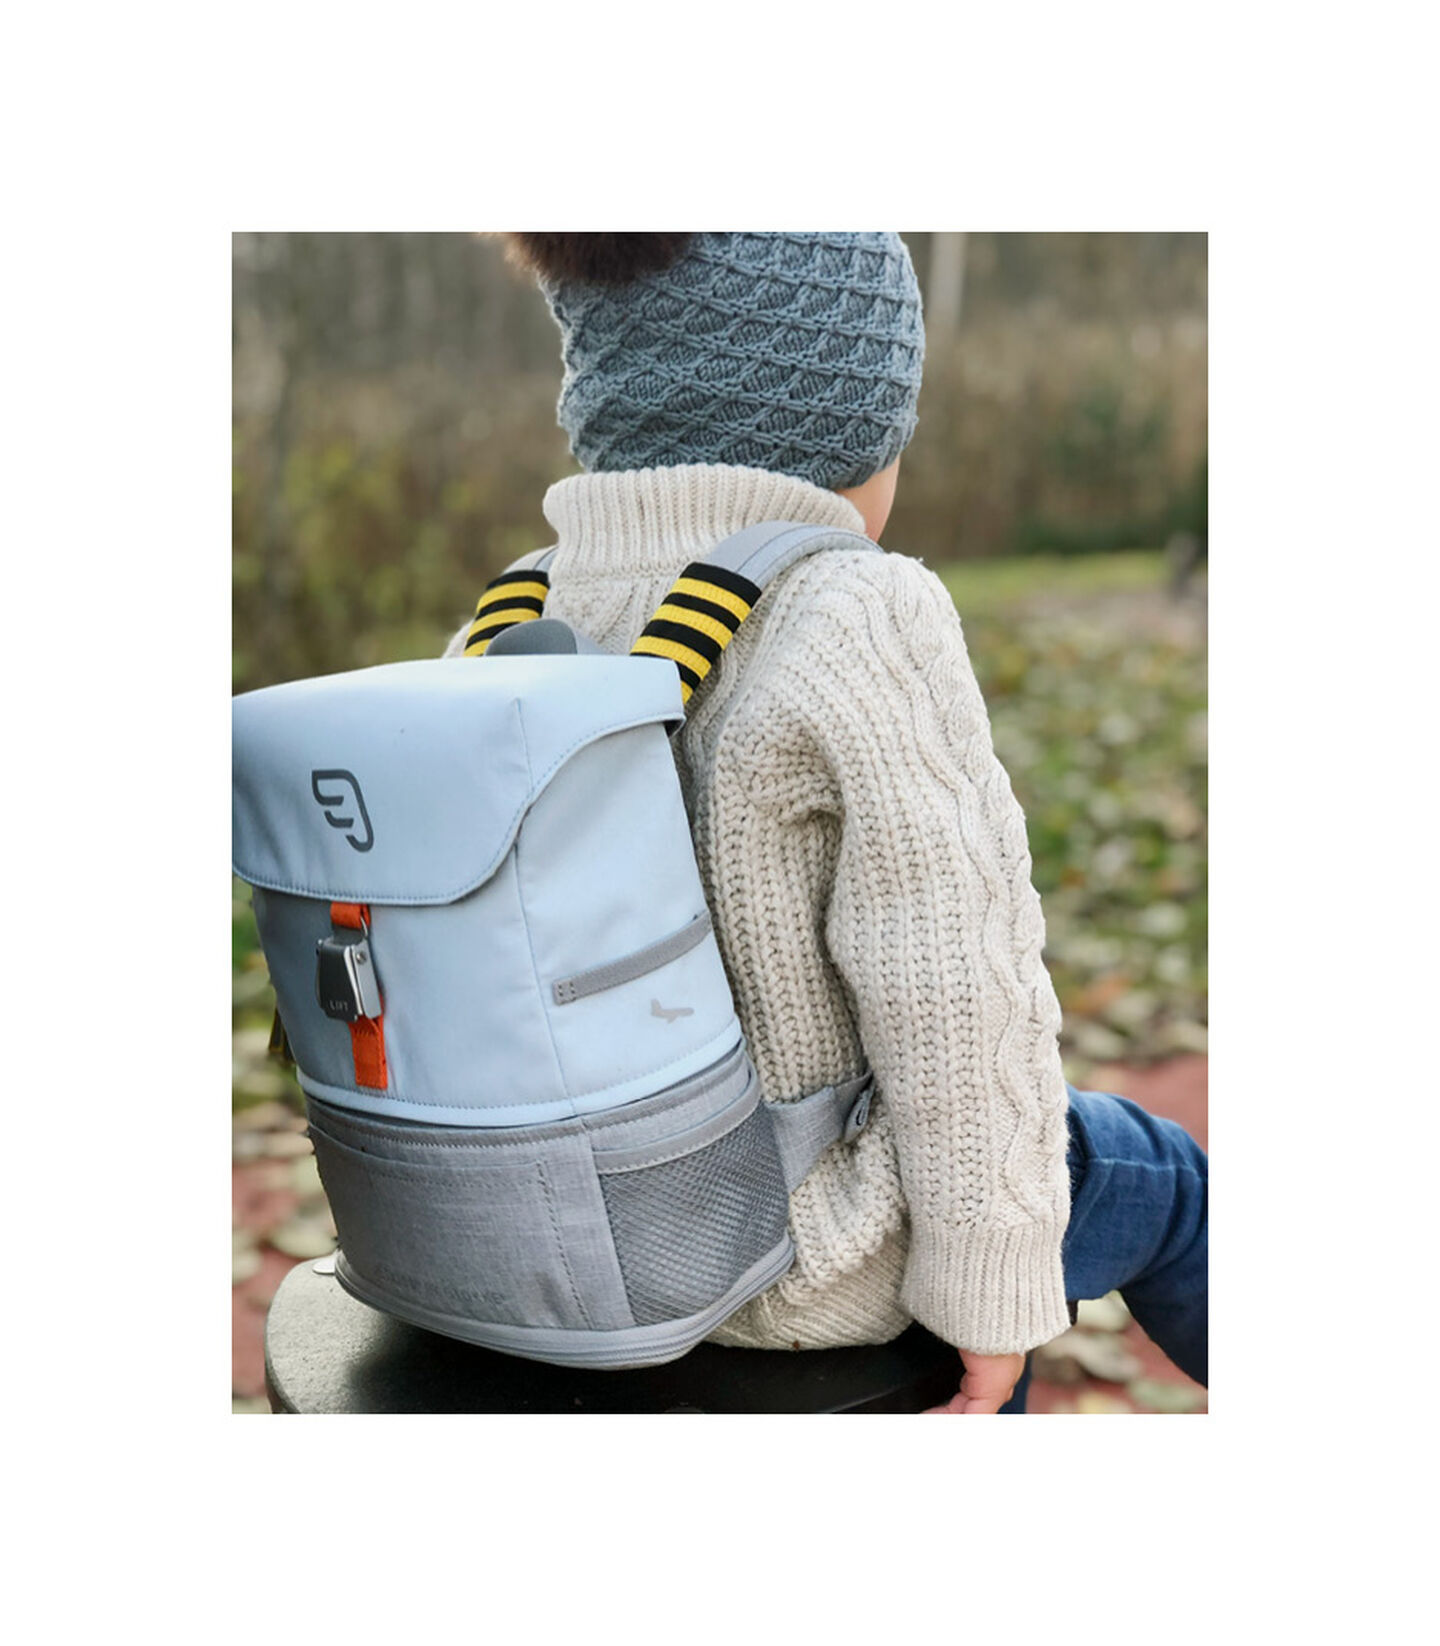 JetKids by Stokke® Crew Backpack Blanco, Blanco, mainview view 2